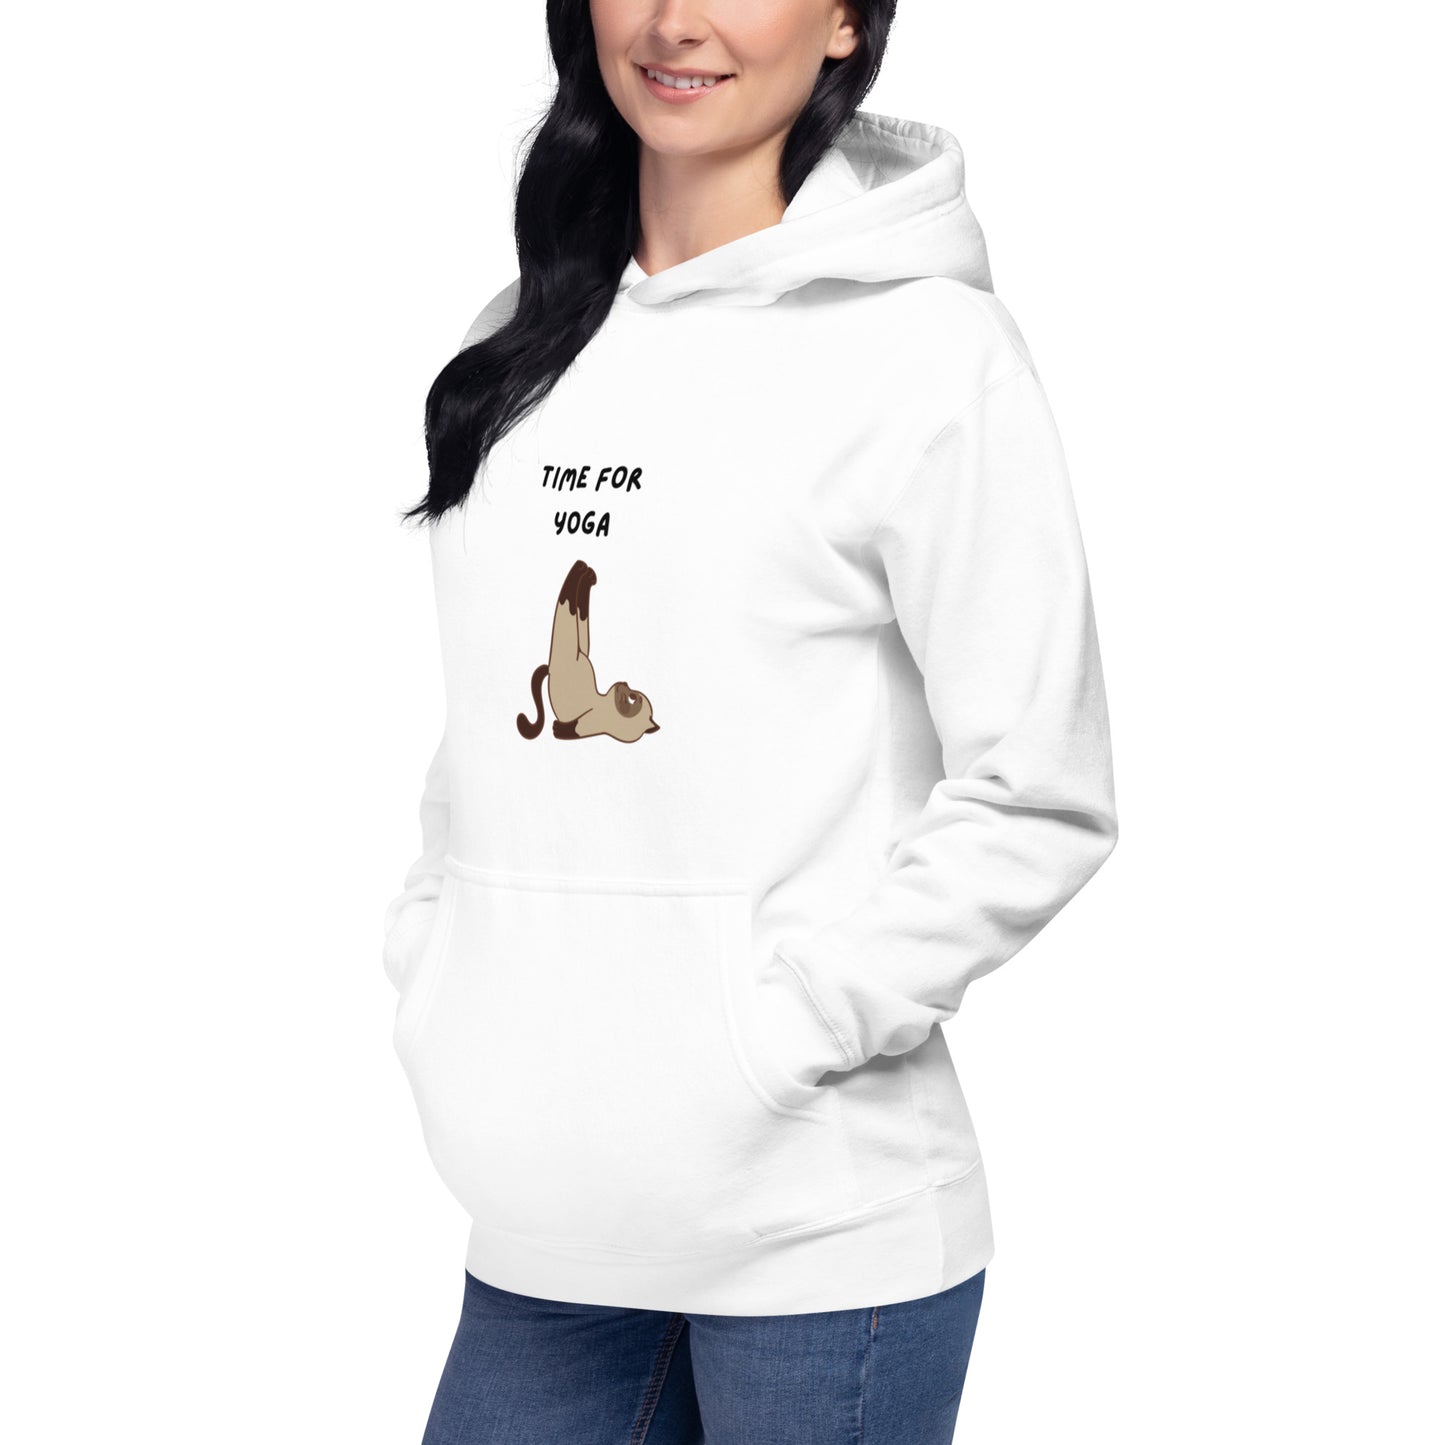 Time for Yoga - Hoodie